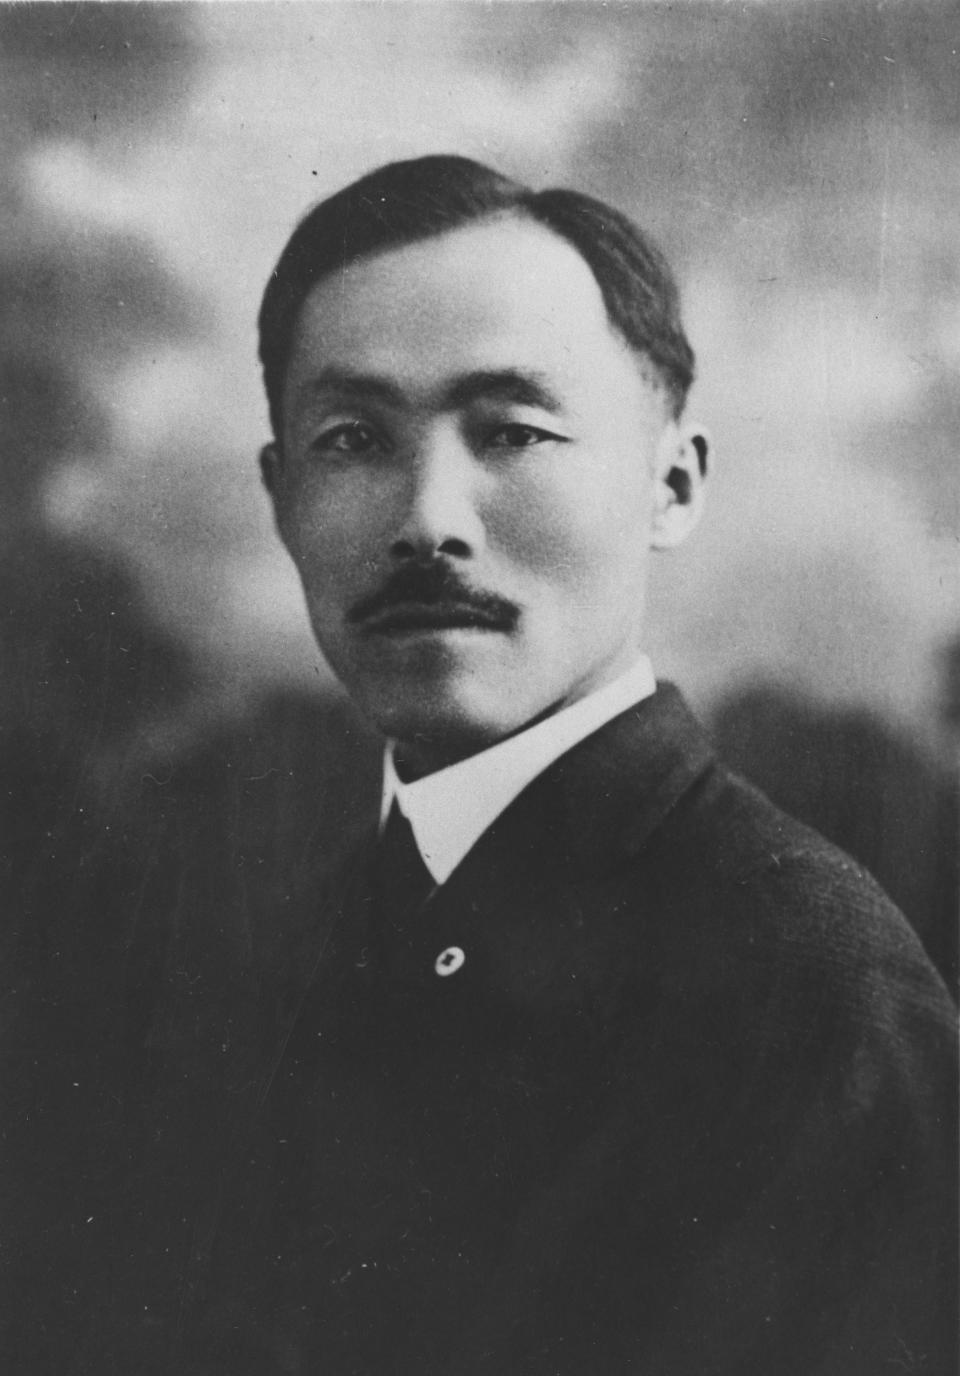 Ahn Chang Ho in the 1920s. (Courtesy Los Angeles Public Library)